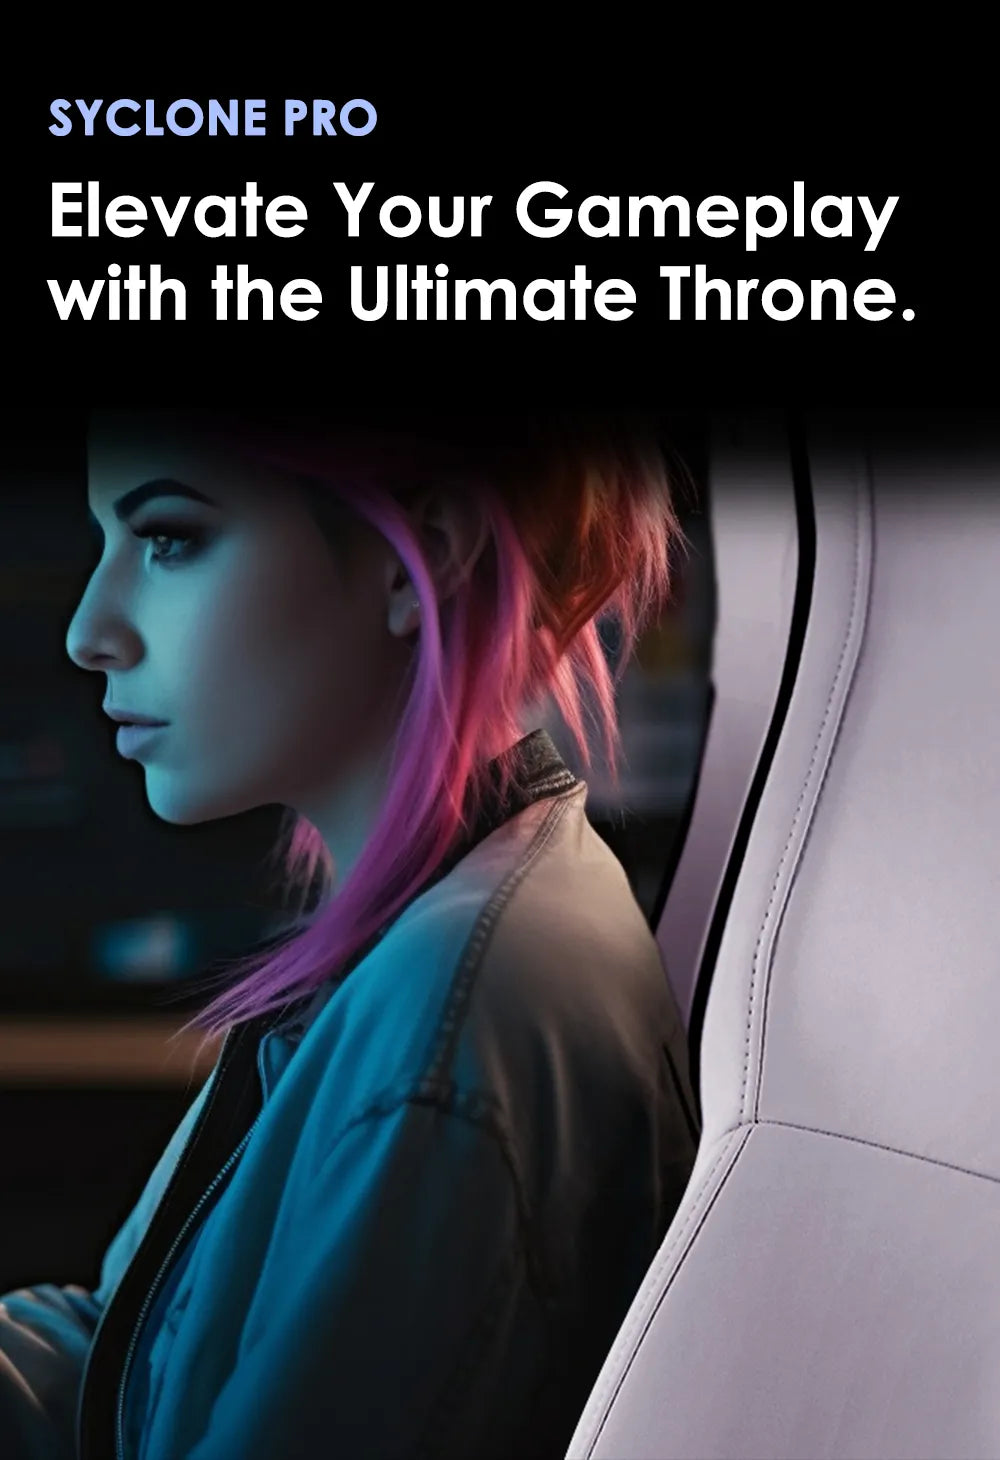 Female gamer sitting in a white SYCLONE PRO gaming chair, enhancing the gaming experience.